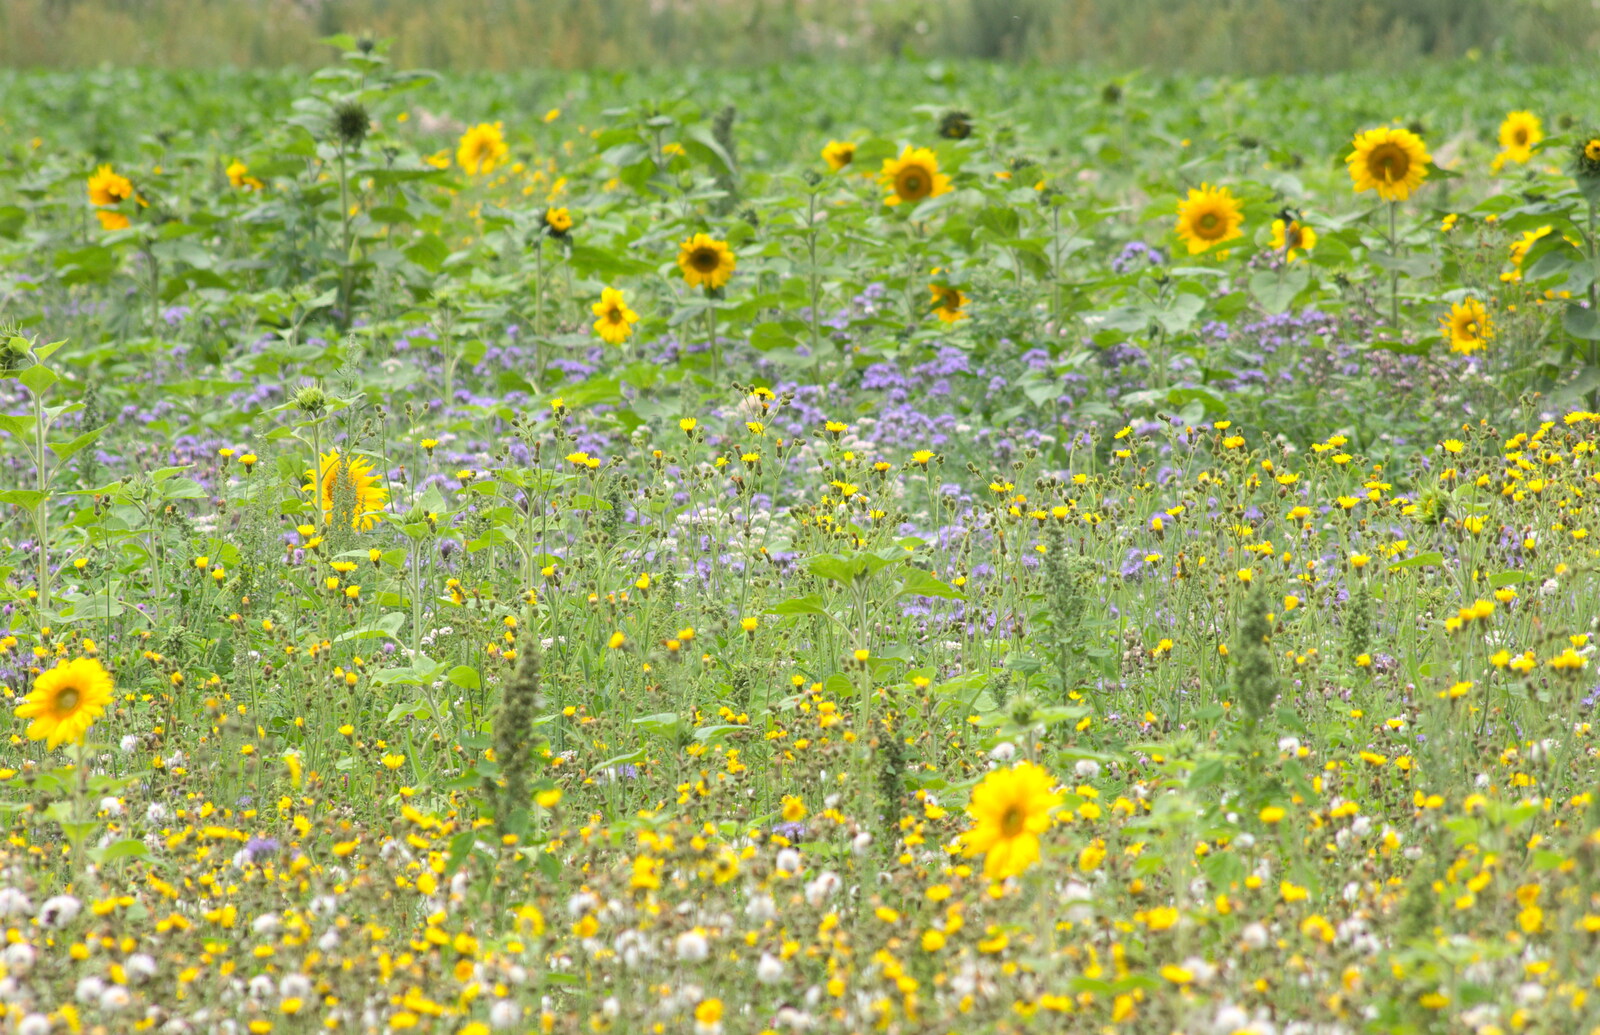 Wild flowers and Sunflowers from A Race For Life, The Park, Diss, Norfolk - 16th August 2015